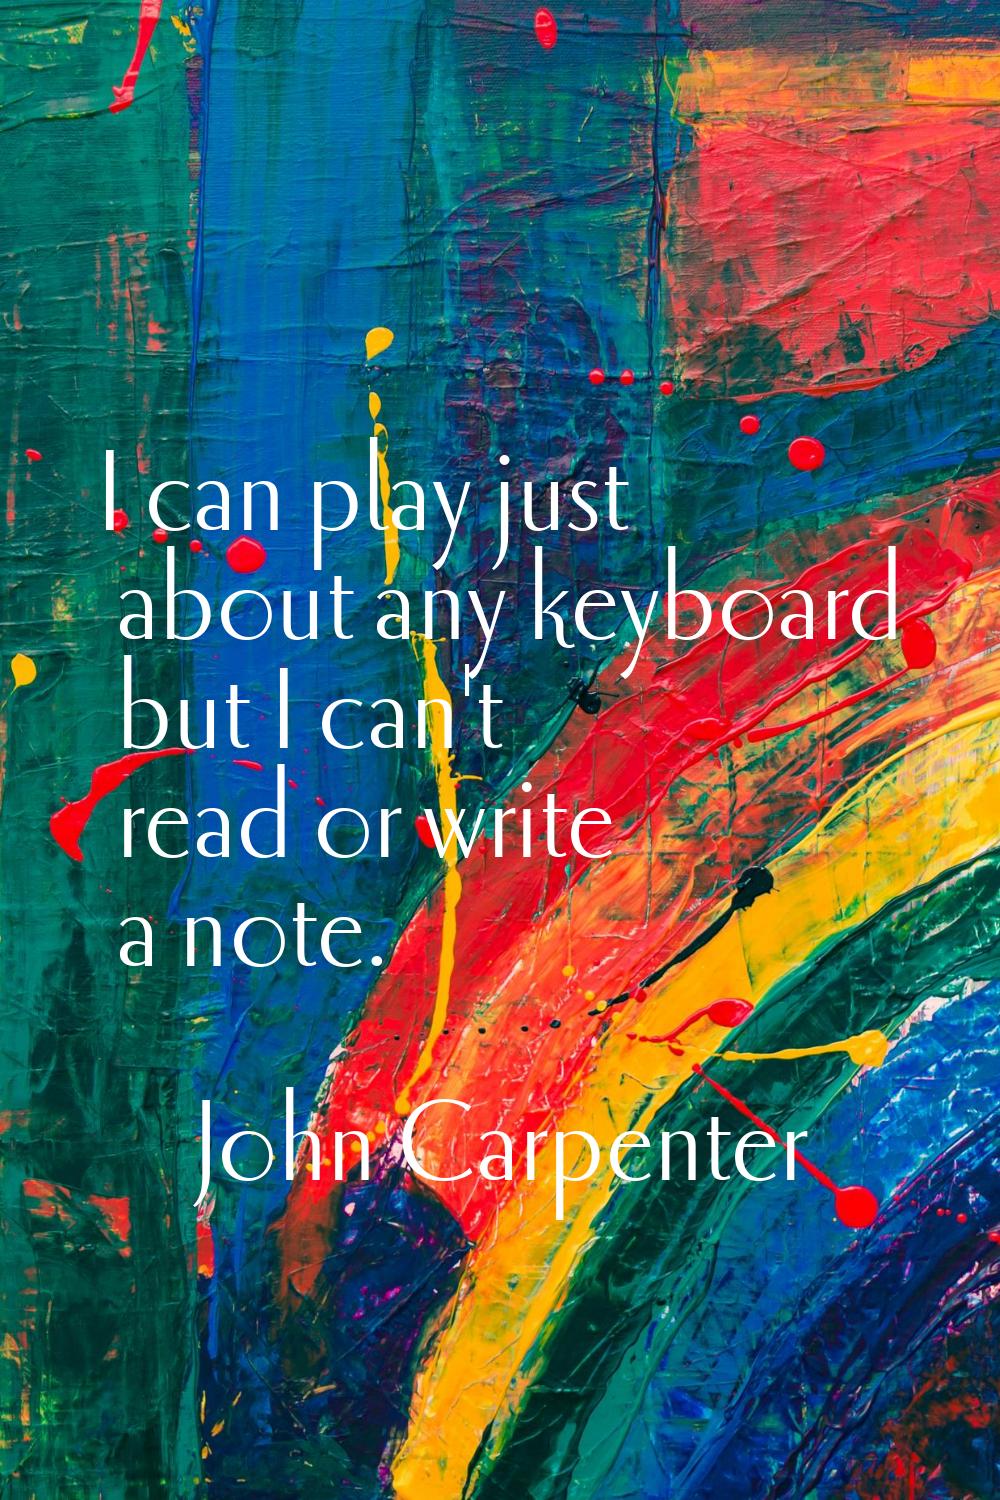 I can play just about any keyboard but I can't read or write a note.